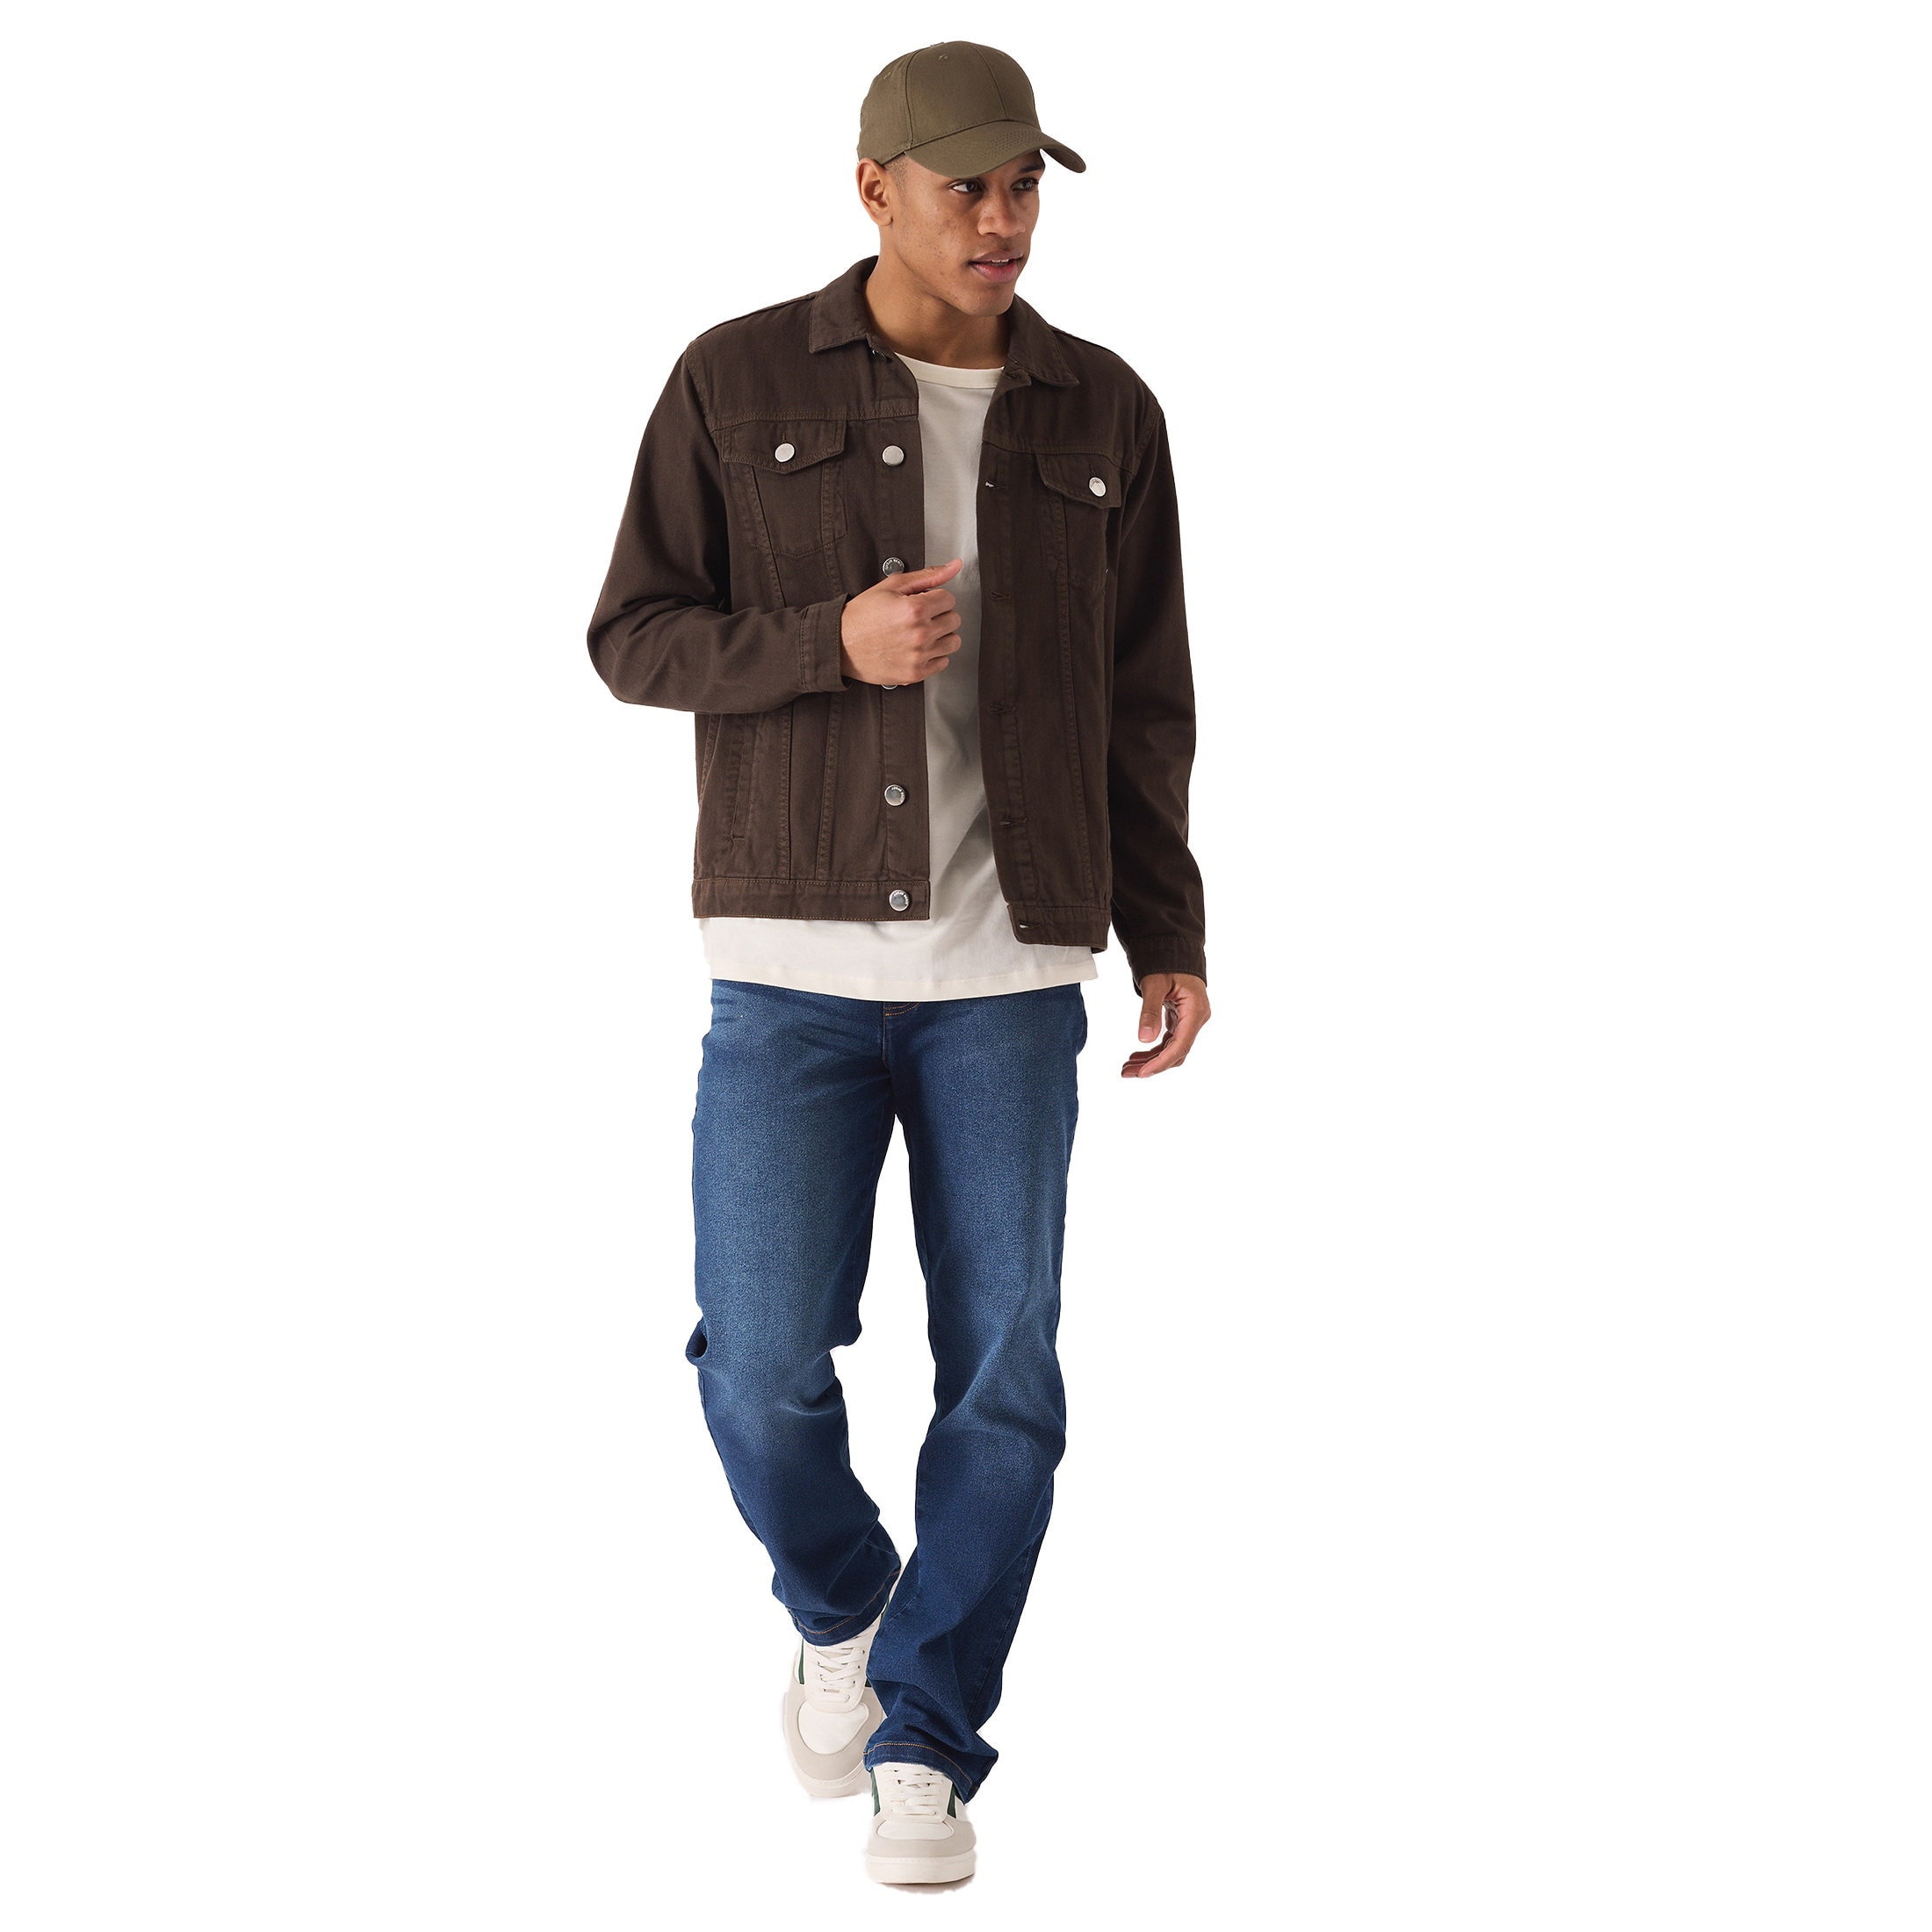 THE BLADE 16 WALE STRETCH CORD JACKET - LIGHT GRAY - Assembly Showroom